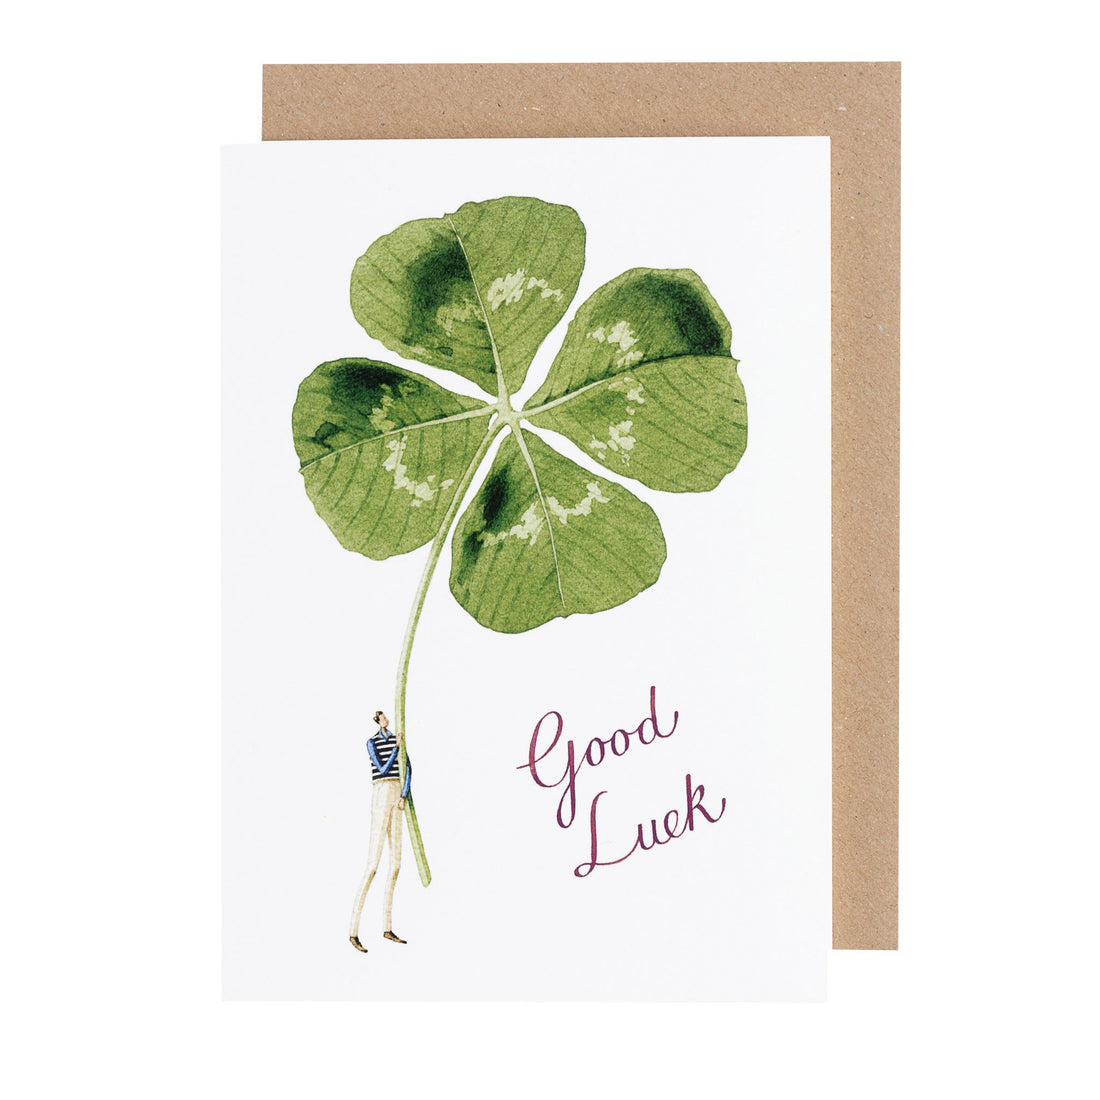 A Good Luck Gentleman Greeting Card designed by Laura Stoddart with a four-leaf clover and the words &quot;good luck,&quot; crafted from environmentally sustainable materials by Hester &amp; Cook.